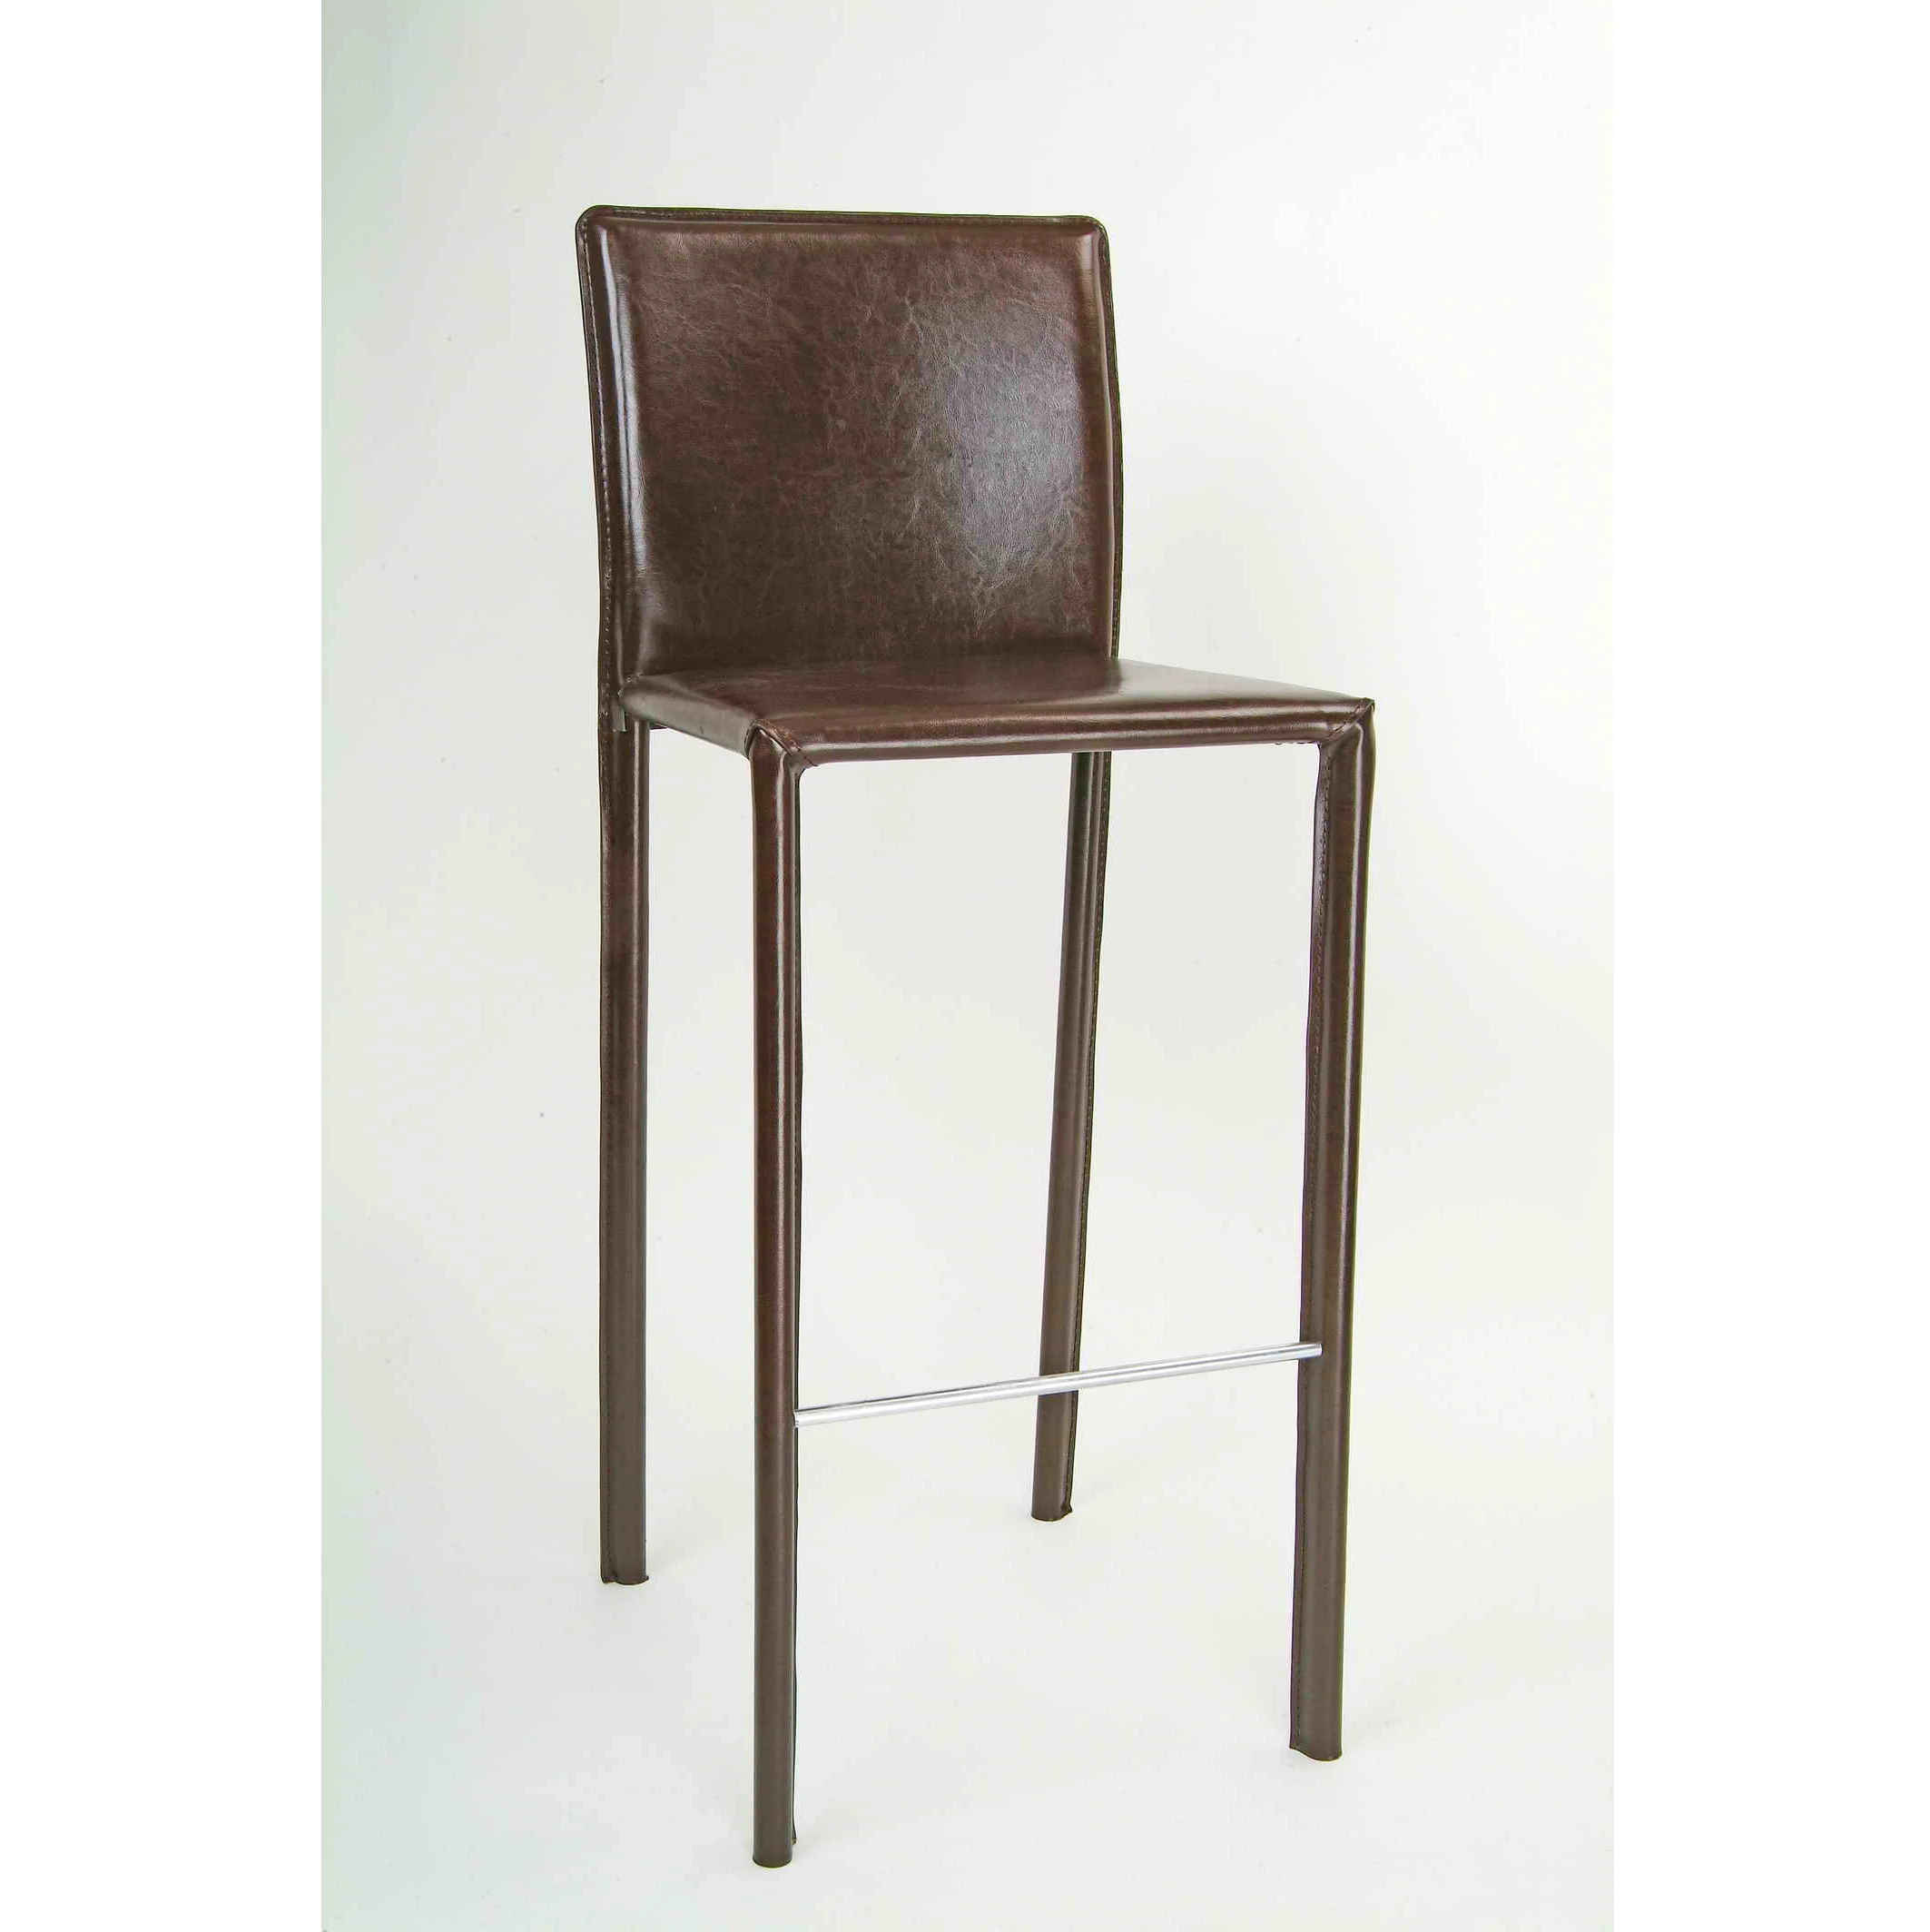 Modern Commercial Bar Furniture Home Goods Pvc Leather Bar Stool